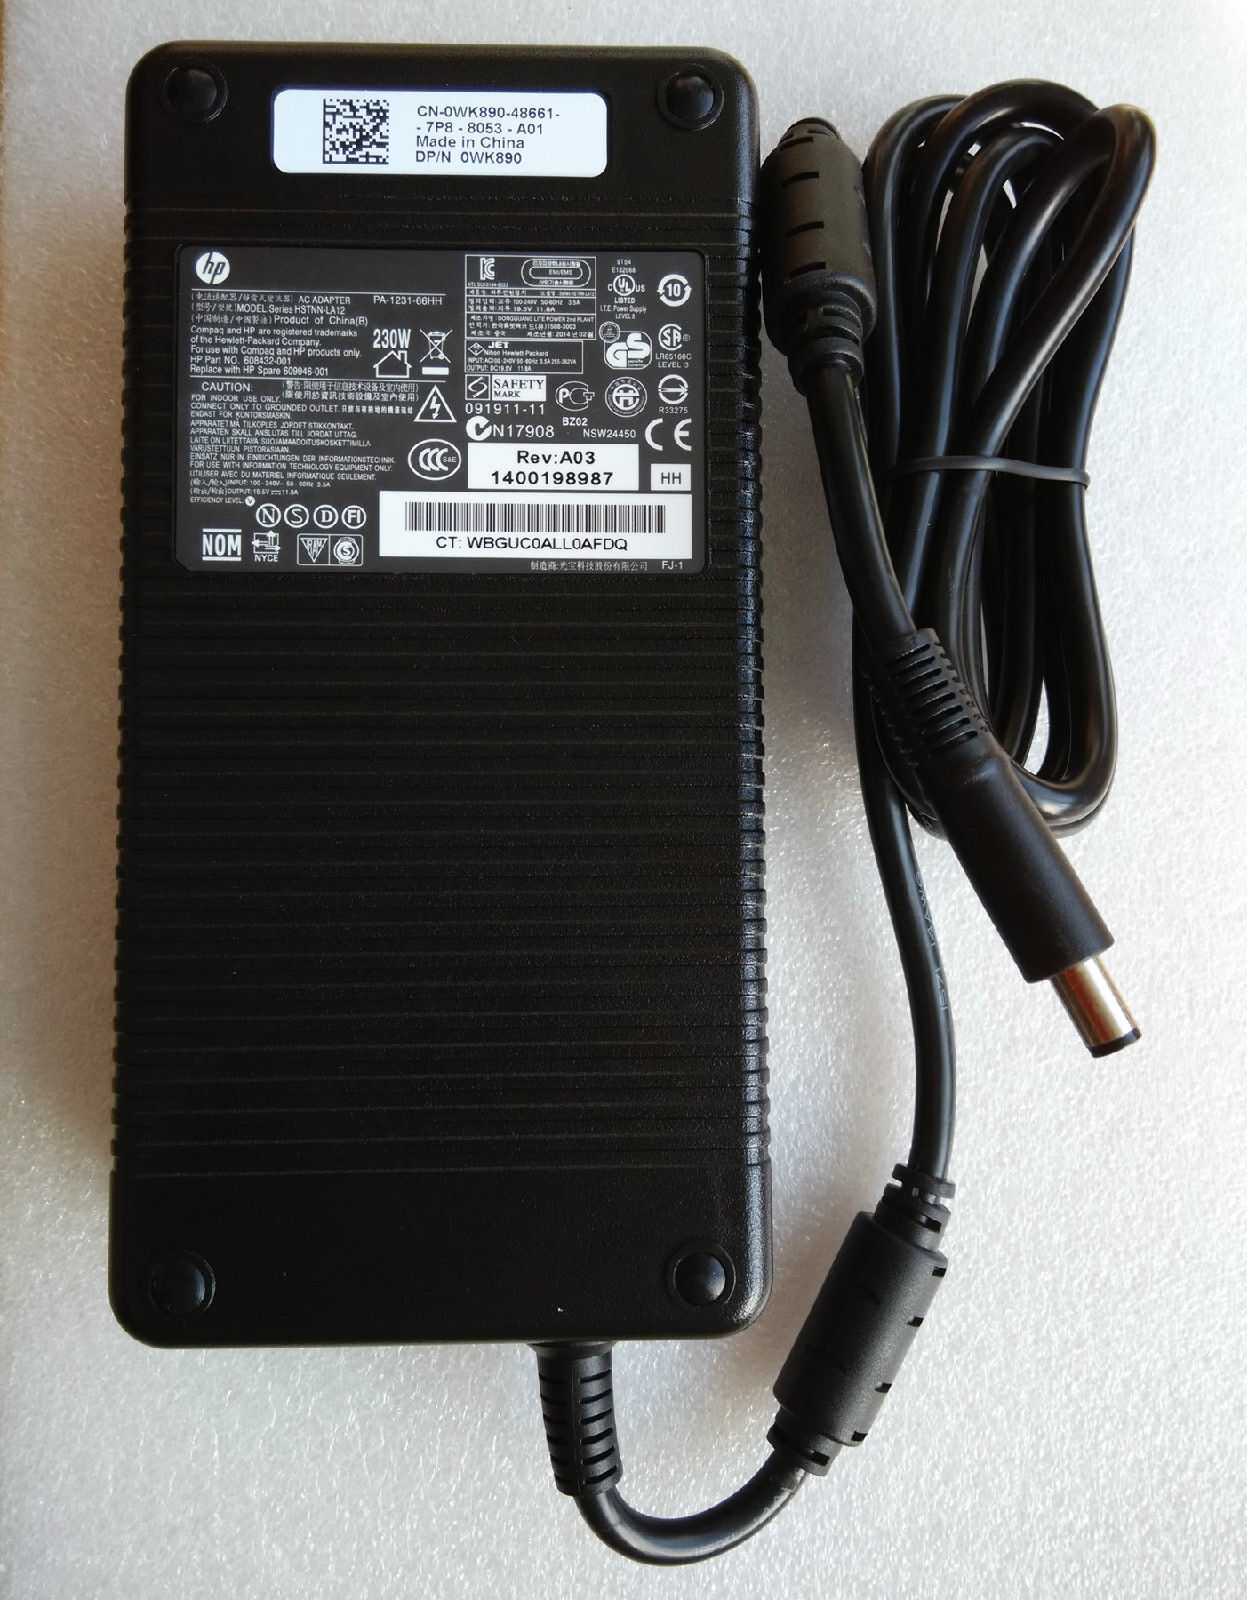 19.5V 11.8A HP EliteBook 8770w 230W laptop AC Adapter Power - Click Image to Close